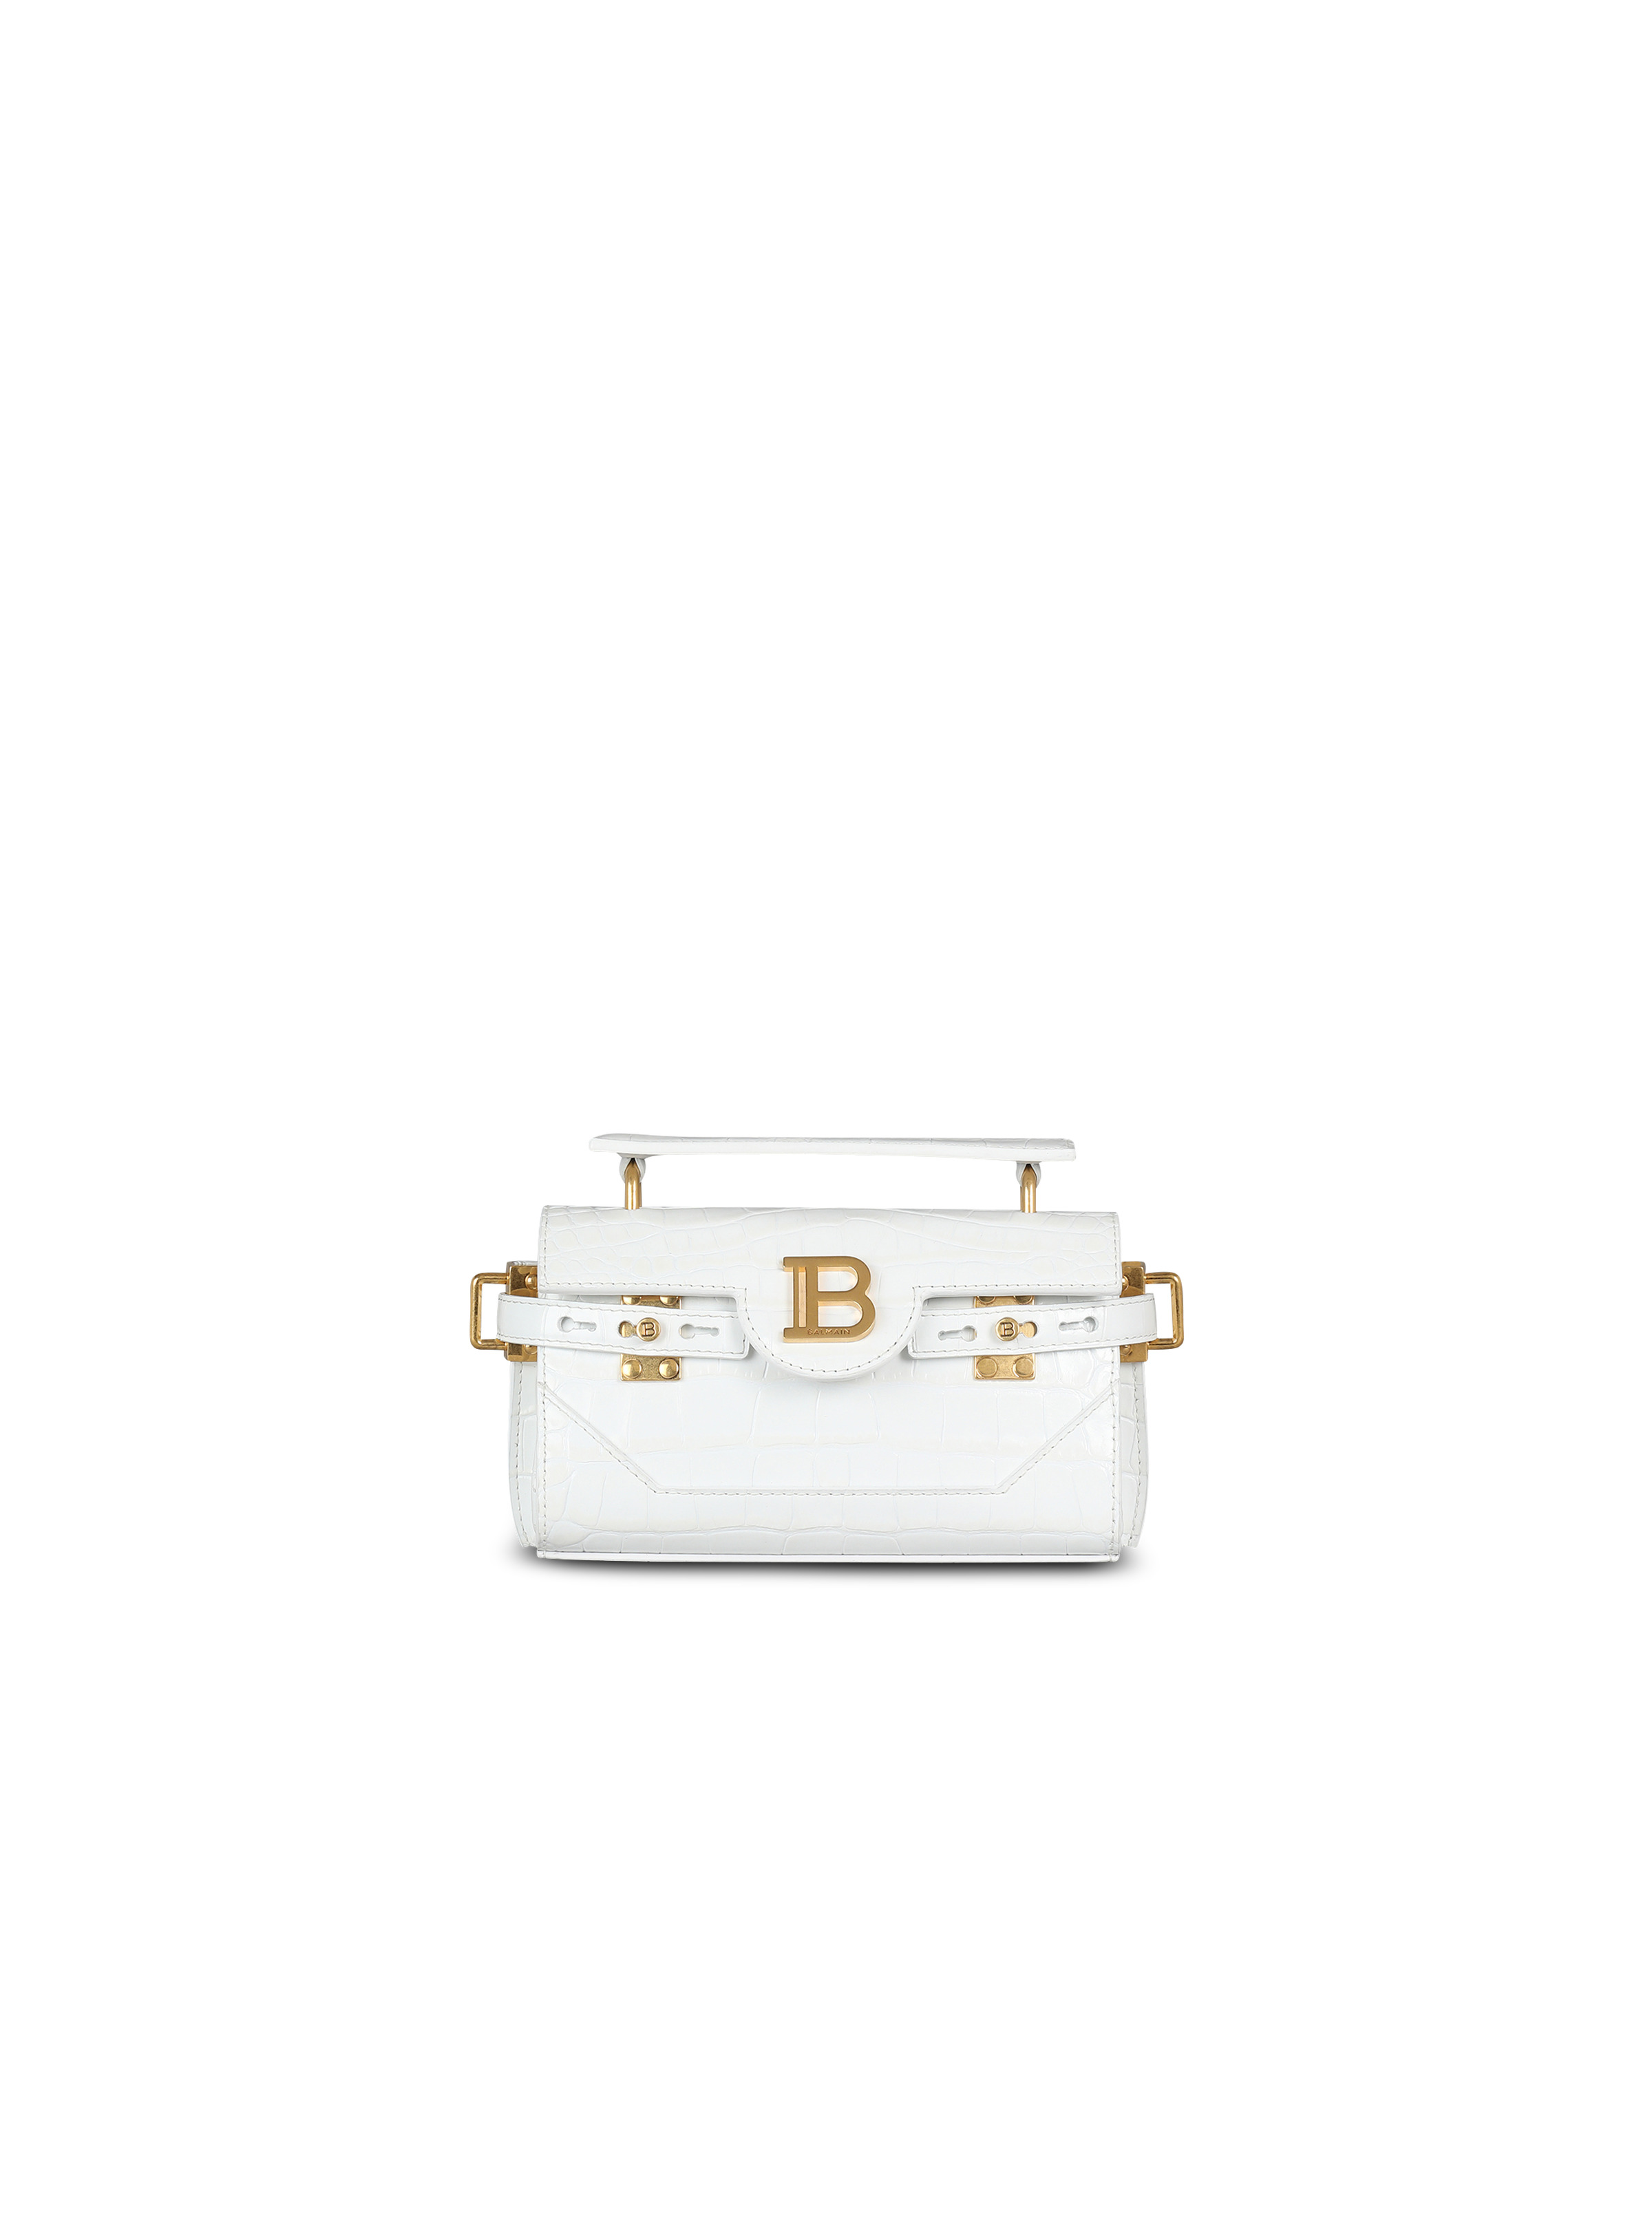 B-Buzz 19 bag in crocodile-embossed leather - 1